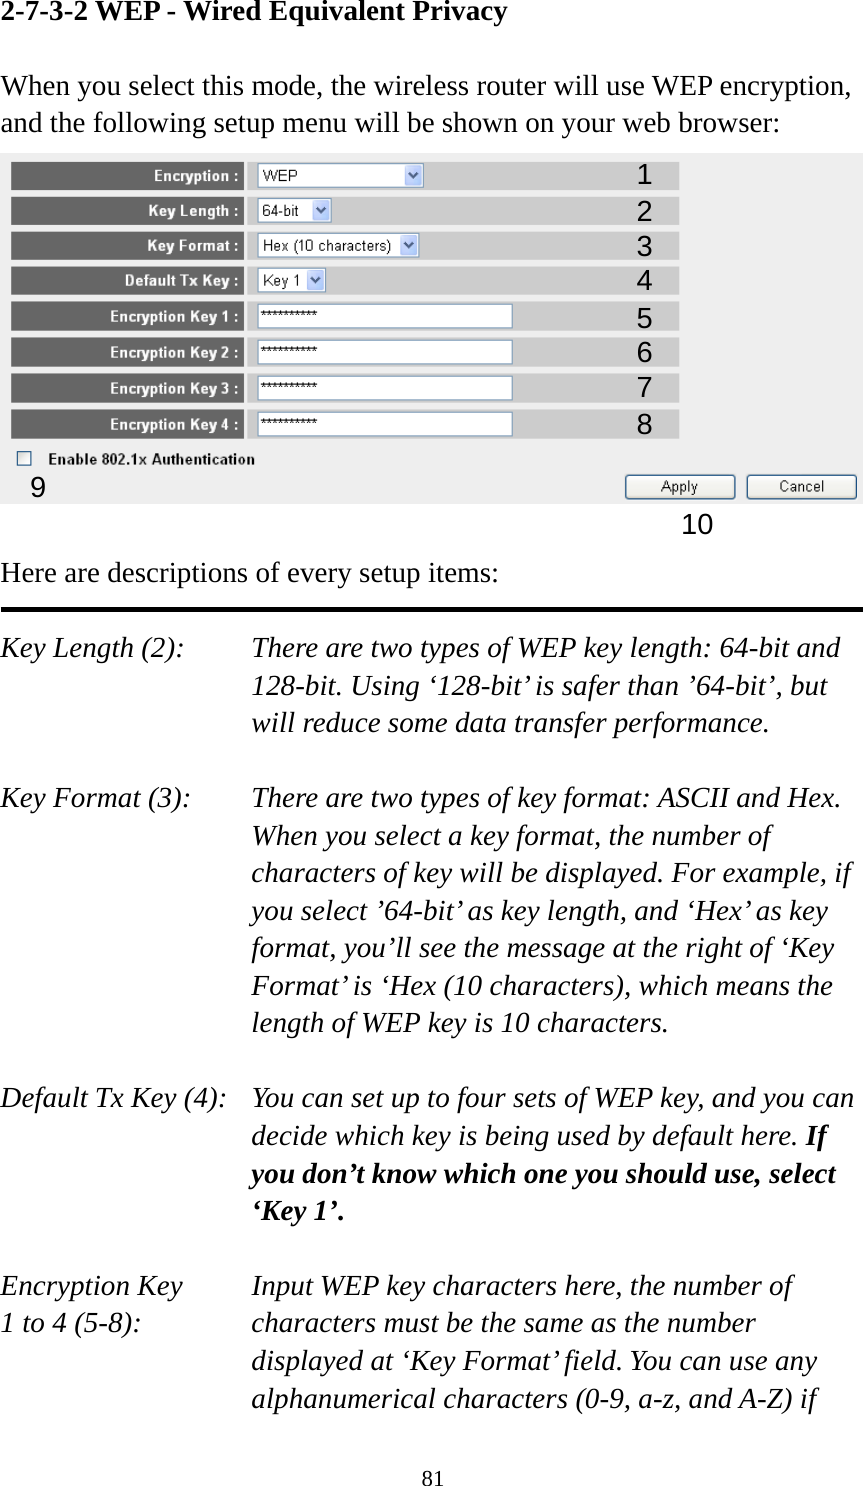 81 2-7-3-2 WEP - Wired Equivalent Privacy  When you select this mode, the wireless router will use WEP encryption, and the following setup menu will be shown on your web browser:   Here are descriptions of every setup items:  Key Length (2):    There are two types of WEP key length: 64-bit and 128-bit. Using ‘128-bit’ is safer than ’64-bit’, but will reduce some data transfer performance.  Key Format (3):    There are two types of key format: ASCII and Hex. When you select a key format, the number of characters of key will be displayed. For example, if you select ’64-bit’ as key length, and ‘Hex’ as key format, you’ll see the message at the right of ‘Key Format’ is ‘Hex (10 characters), which means the length of WEP key is 10 characters.  Default Tx Key (4):   You can set up to four sets of WEP key, and you can decide which key is being used by default here. If you don’t know which one you should use, select ‘Key 1’.  Encryption Key     Input WEP key characters here, the number of 1 to 4 (5-8):    characters must be the same as the number displayed at ‘Key Format’ field. You can use any alphanumerical characters (0-9, a-z, and A-Z) if 123 5 7 6 9 4 8 10 